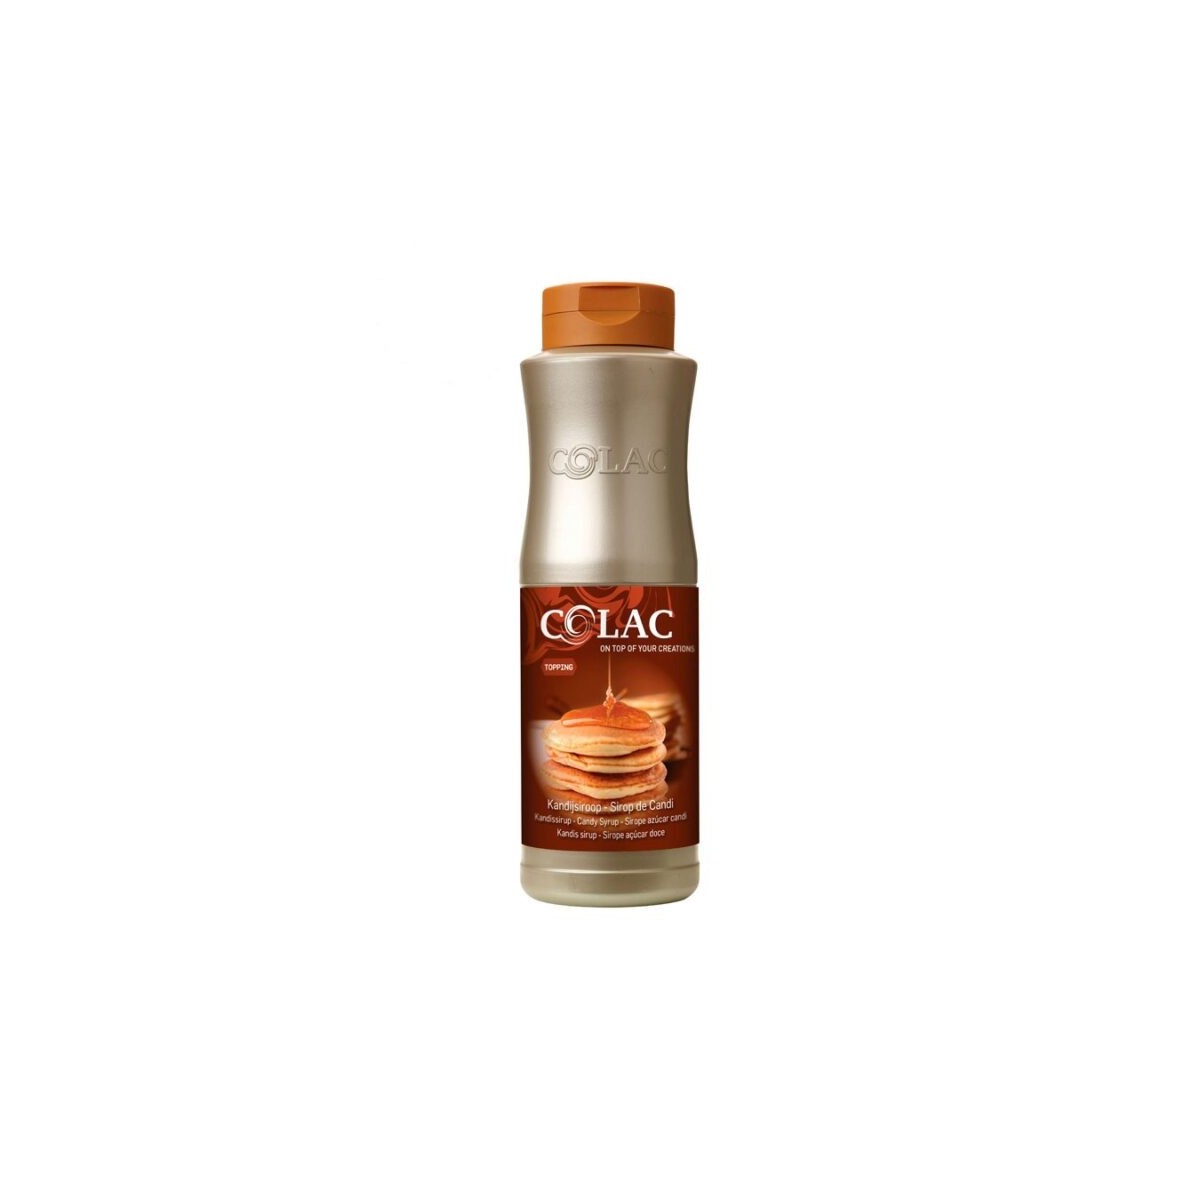 COLAC TOPPING SIROP DE CANDI 1KG